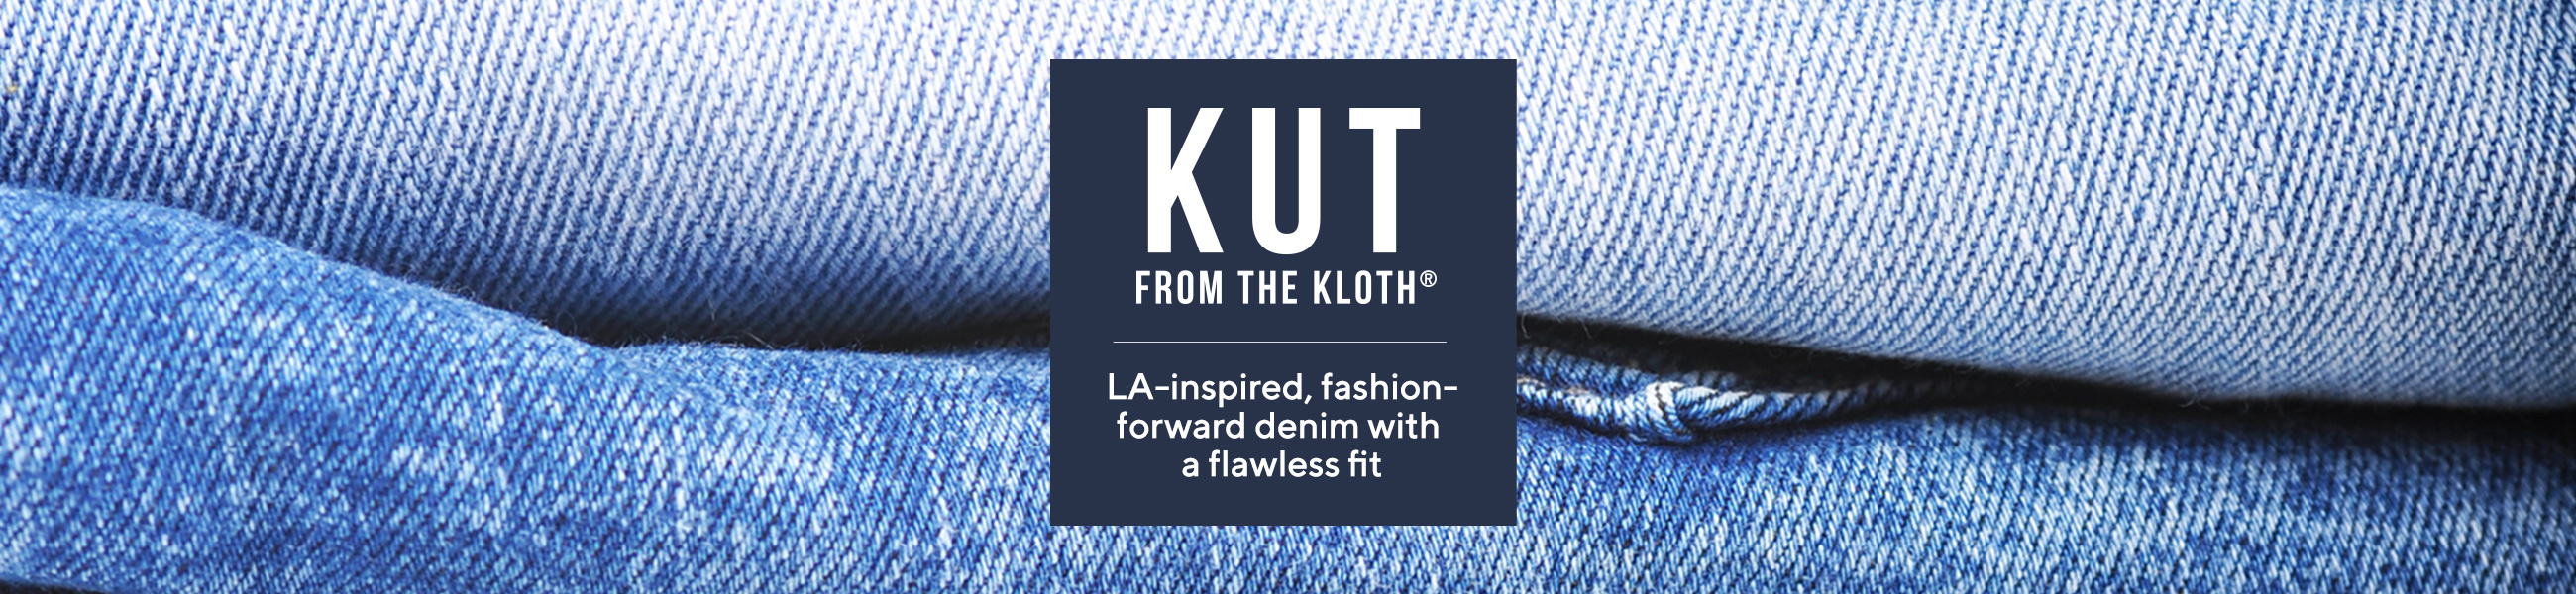 Kut from the Kloth LA-inspired, fashion-forward denim with a flawless fit